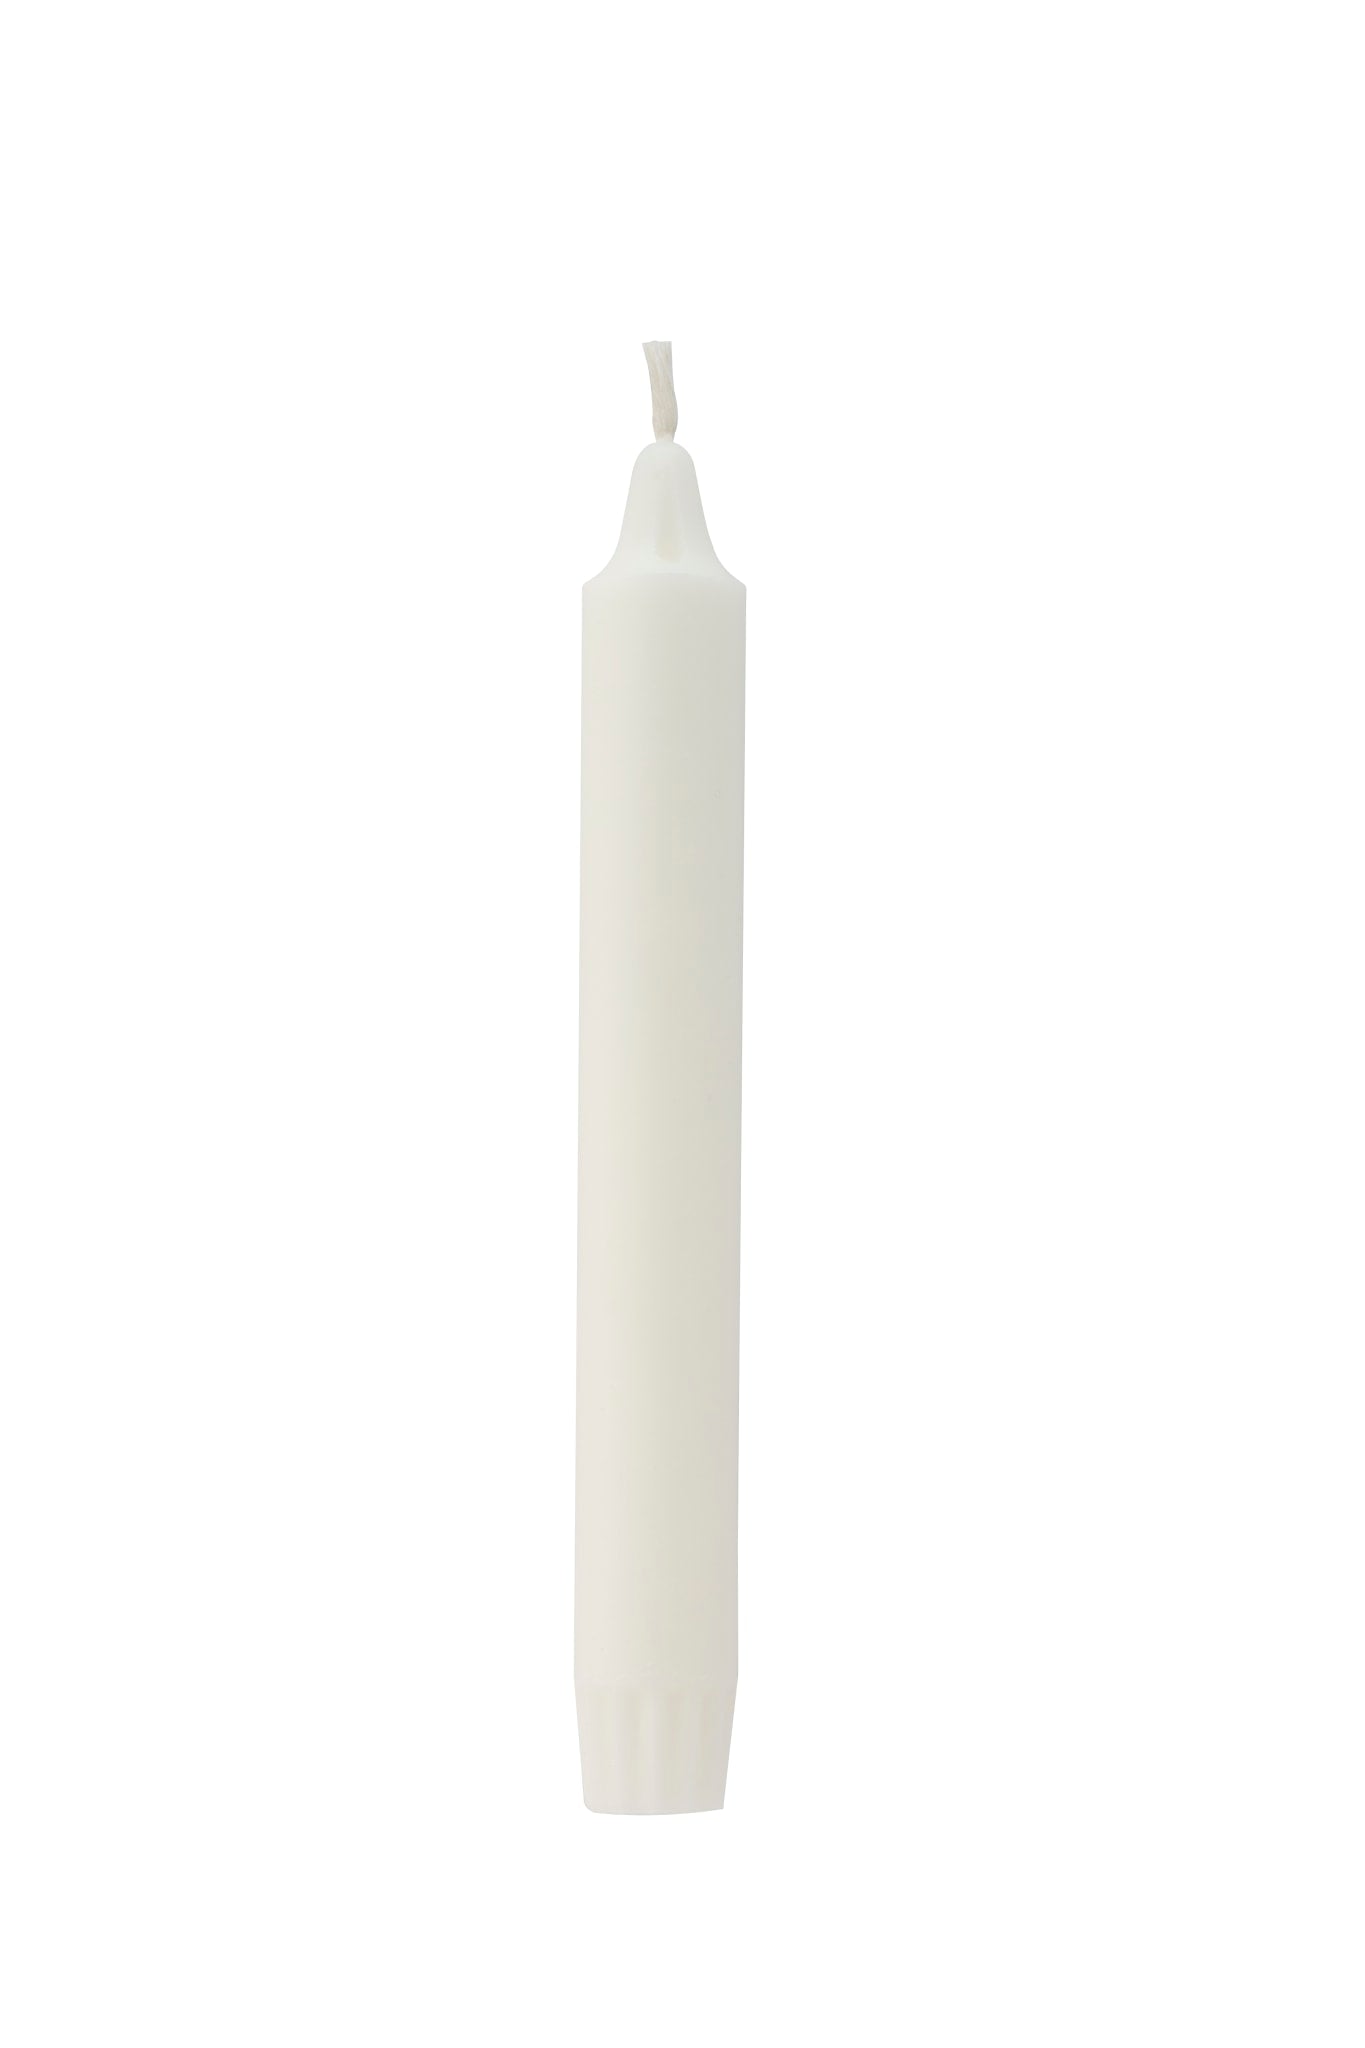 Swedish Eco-labelled Canal Candle, Ø=2.4 cm LENGTH 20 cm -